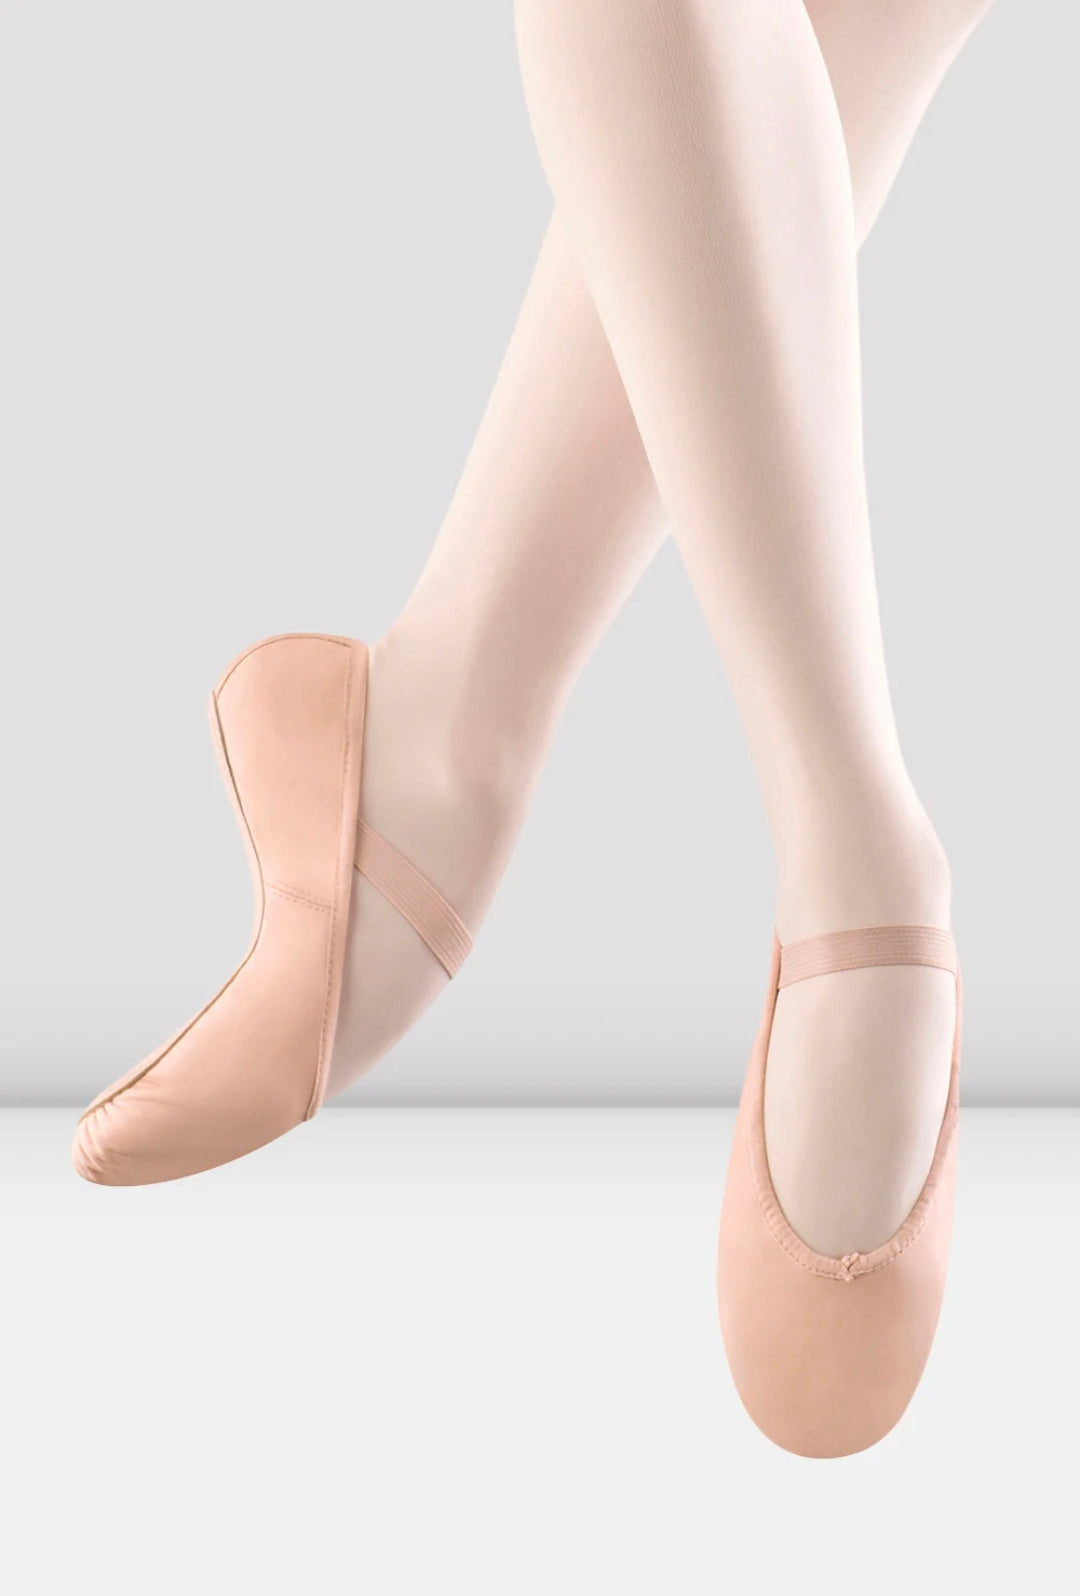 Bloch Arise Full Sole Leather Ballet Shoes